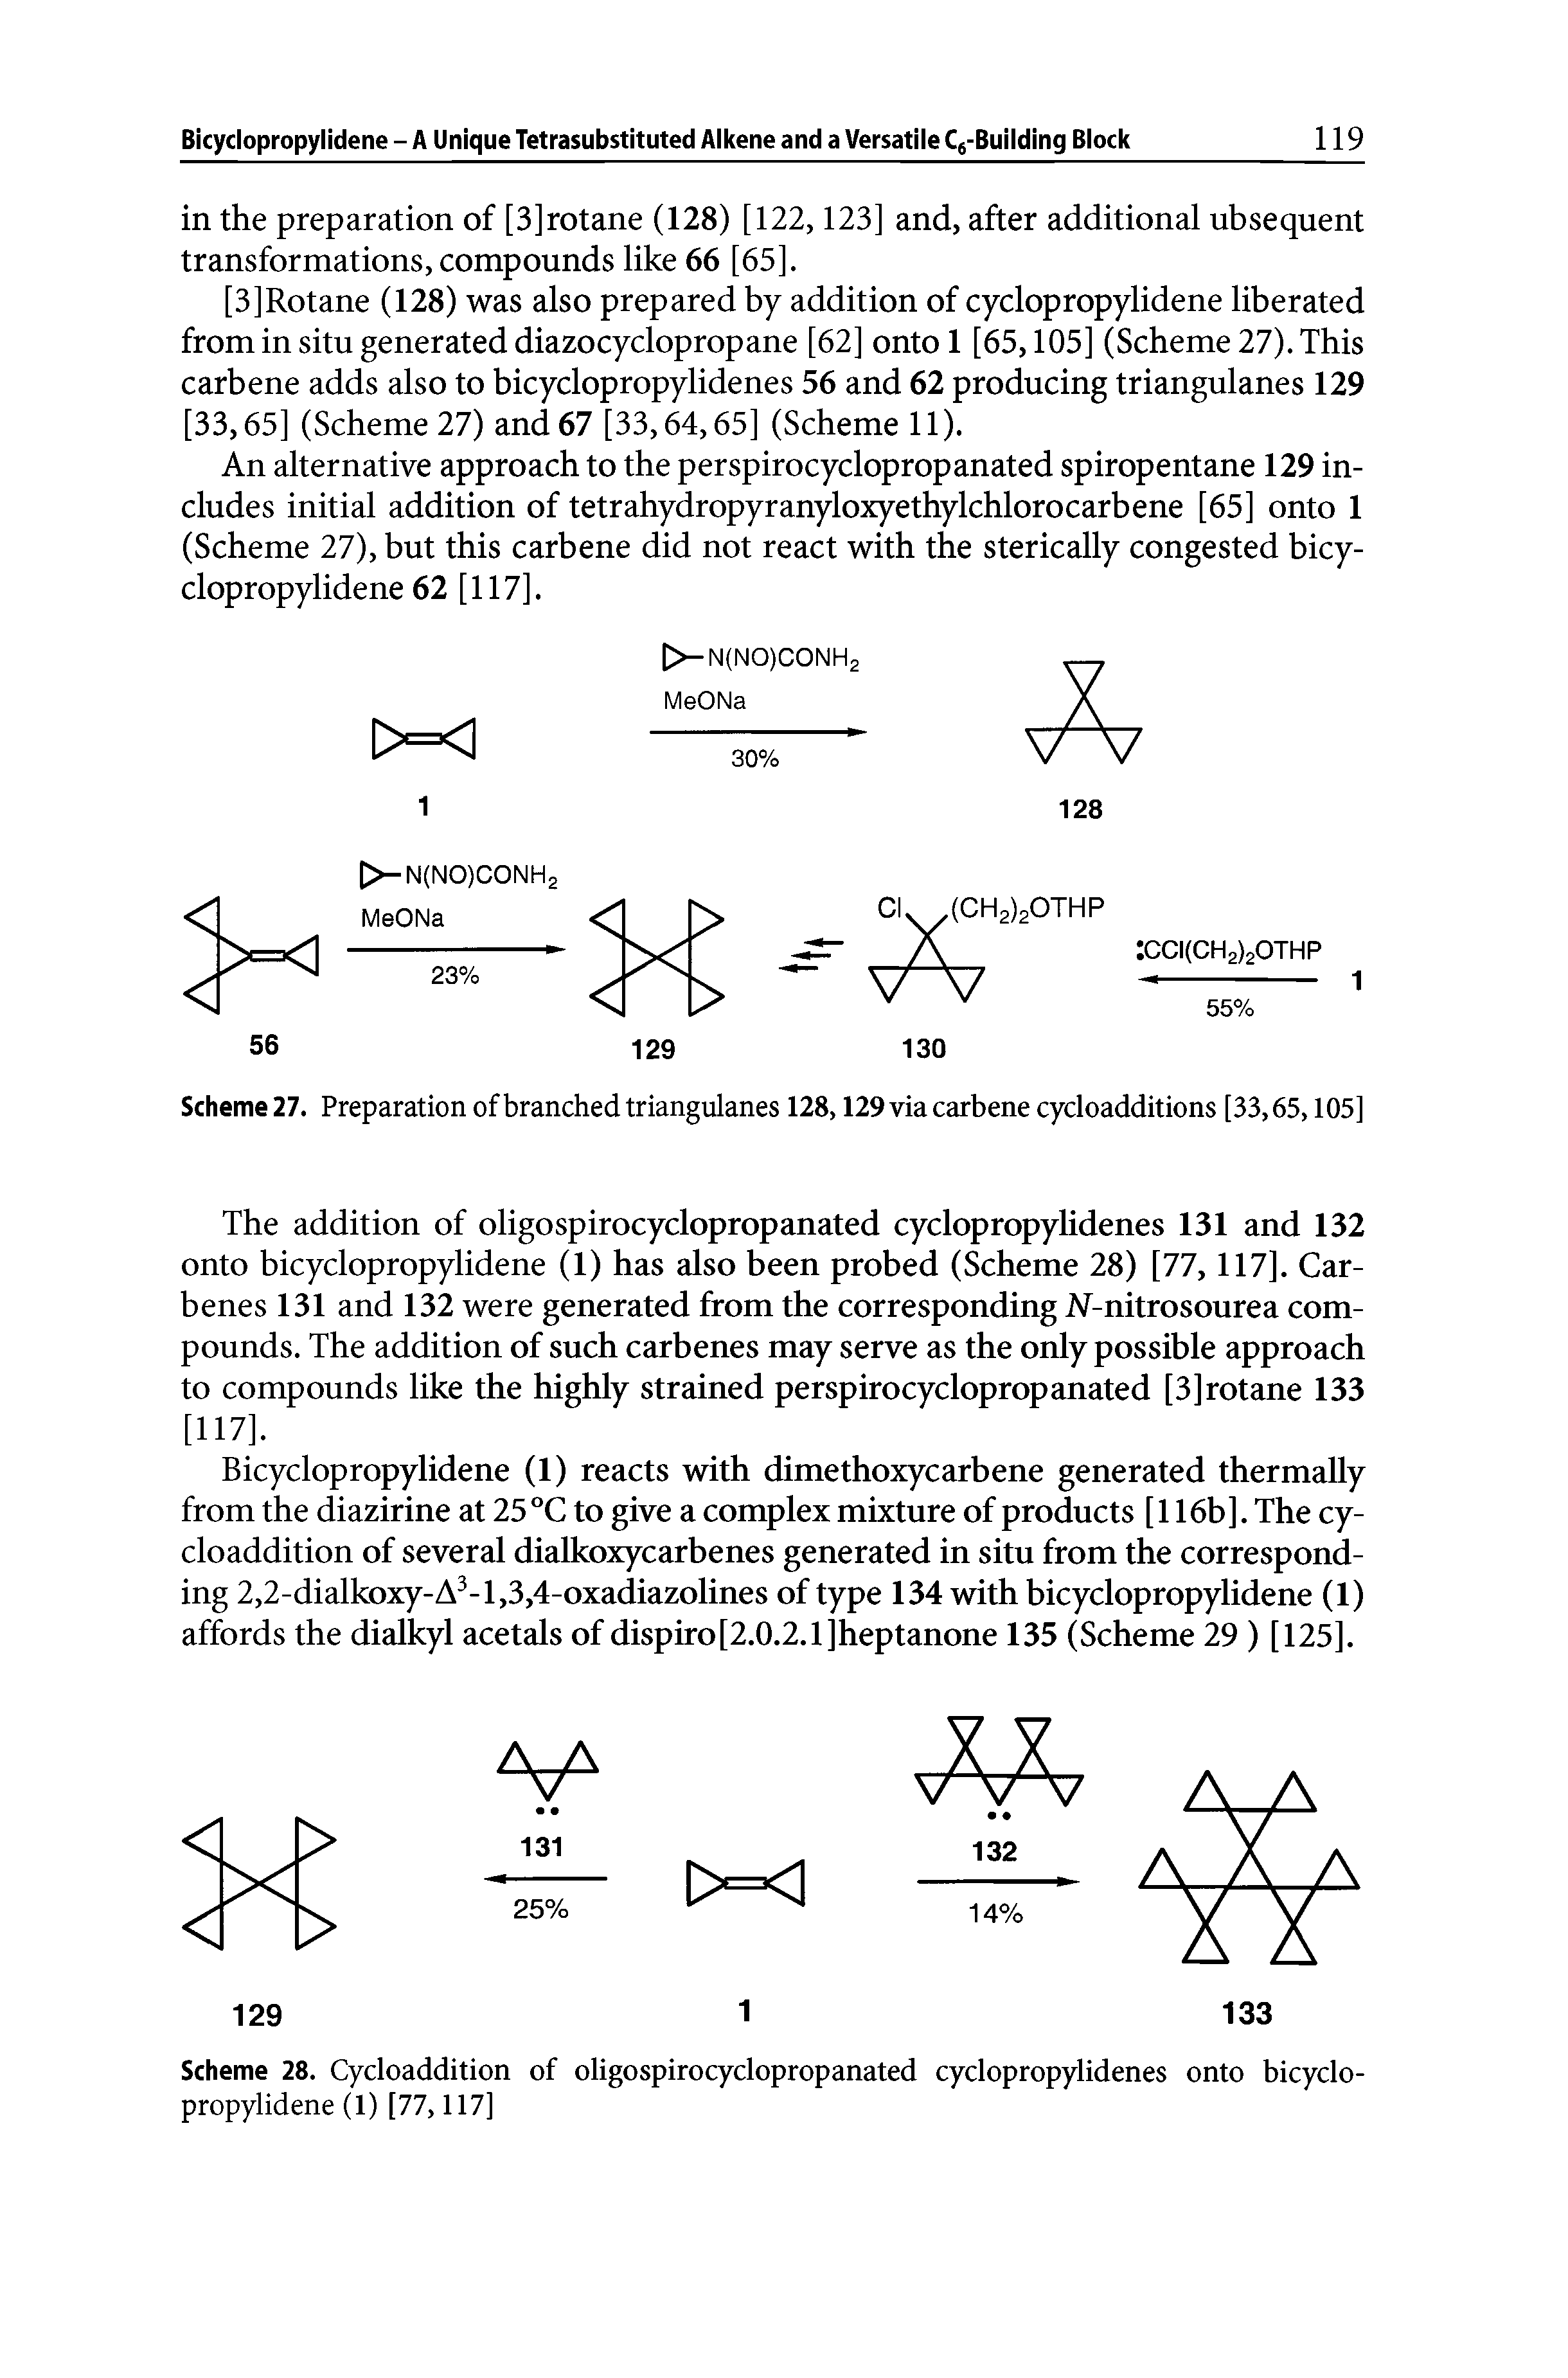 Scheme 27. Preparation of branched triangulanes 128,129 via carbene cycloadditions [33,65,105]...